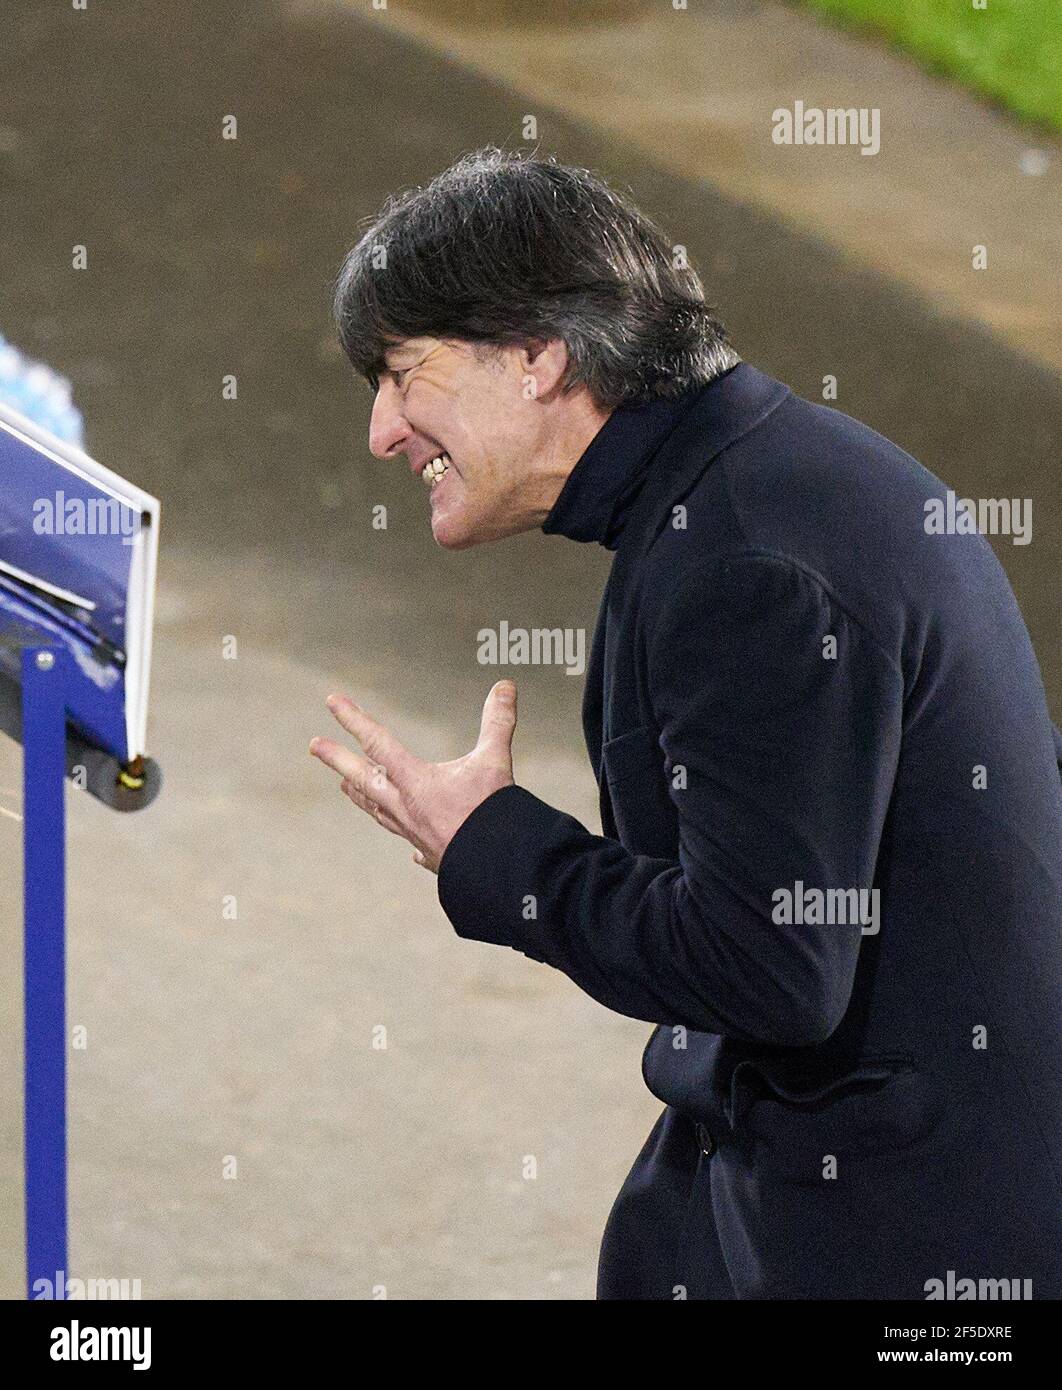 DFB headcoach Joachim Jogi LOEW, LÖW,wutanfall, Emotions, feelings, reaction, anger, furious, scream, rage, action, aggressive, aggression,  in the match GERMANY - ICELAND  Deutschland - ISLAND Qualification for World Championships, WM Quali, Season 2020/2021,  March 25, 2021  in Duisburg, Germany.  © Peter Schatz / Alamy Live News  Important: DFB regulations prohibit any use of photographs as image sequences and/or quasi-video. Stock Photo